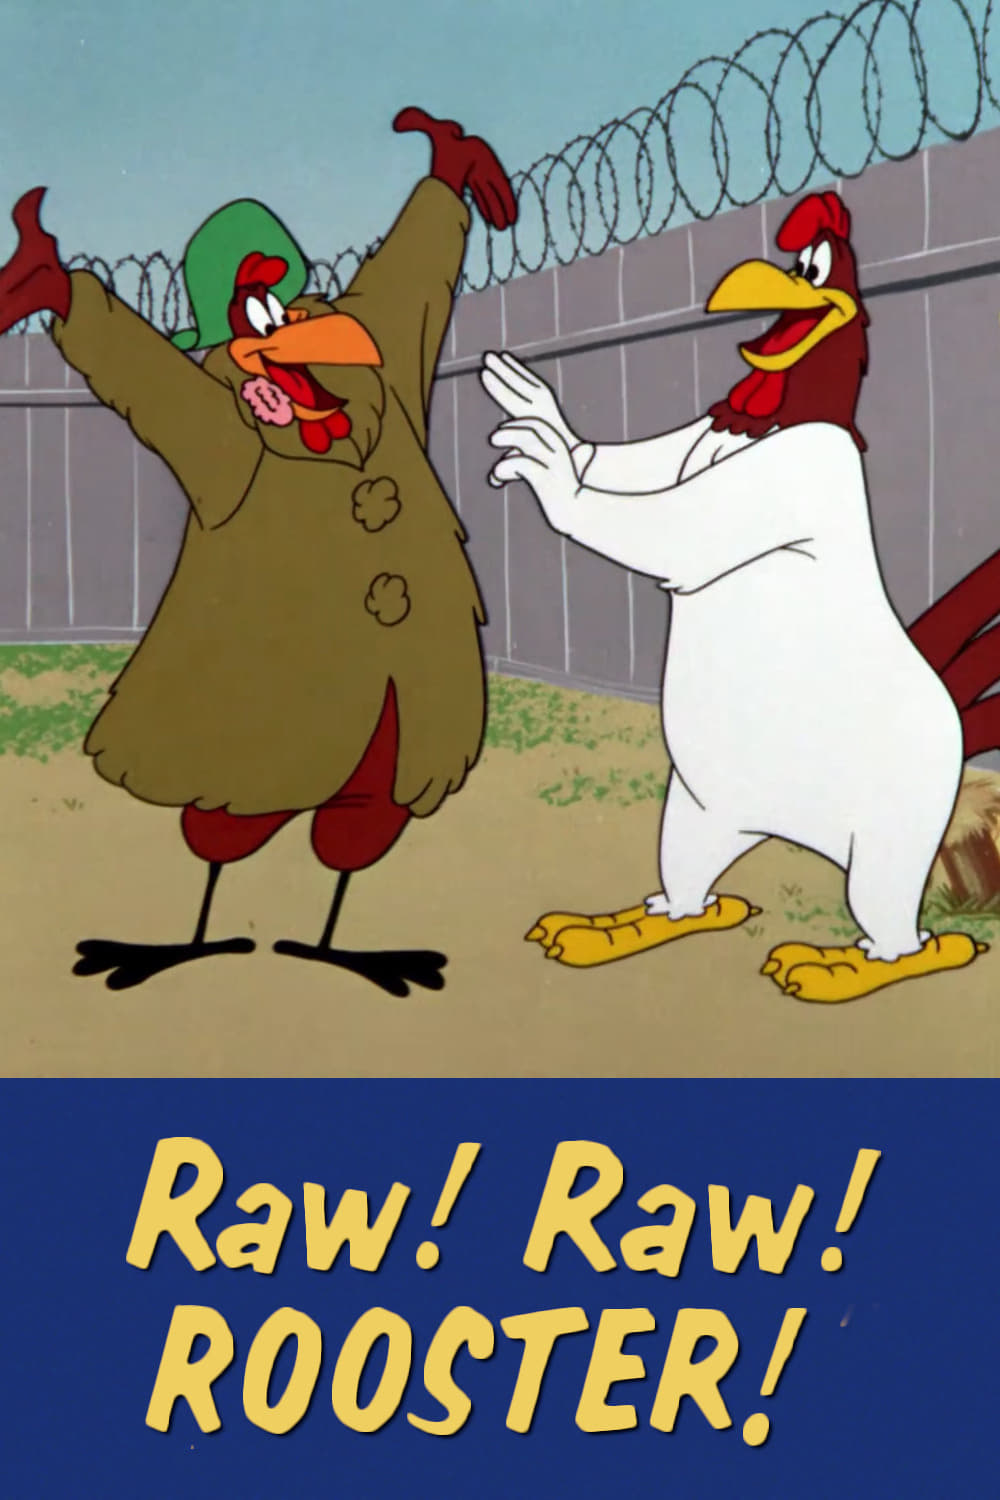 Raw! Raw! Rooster! (1956)